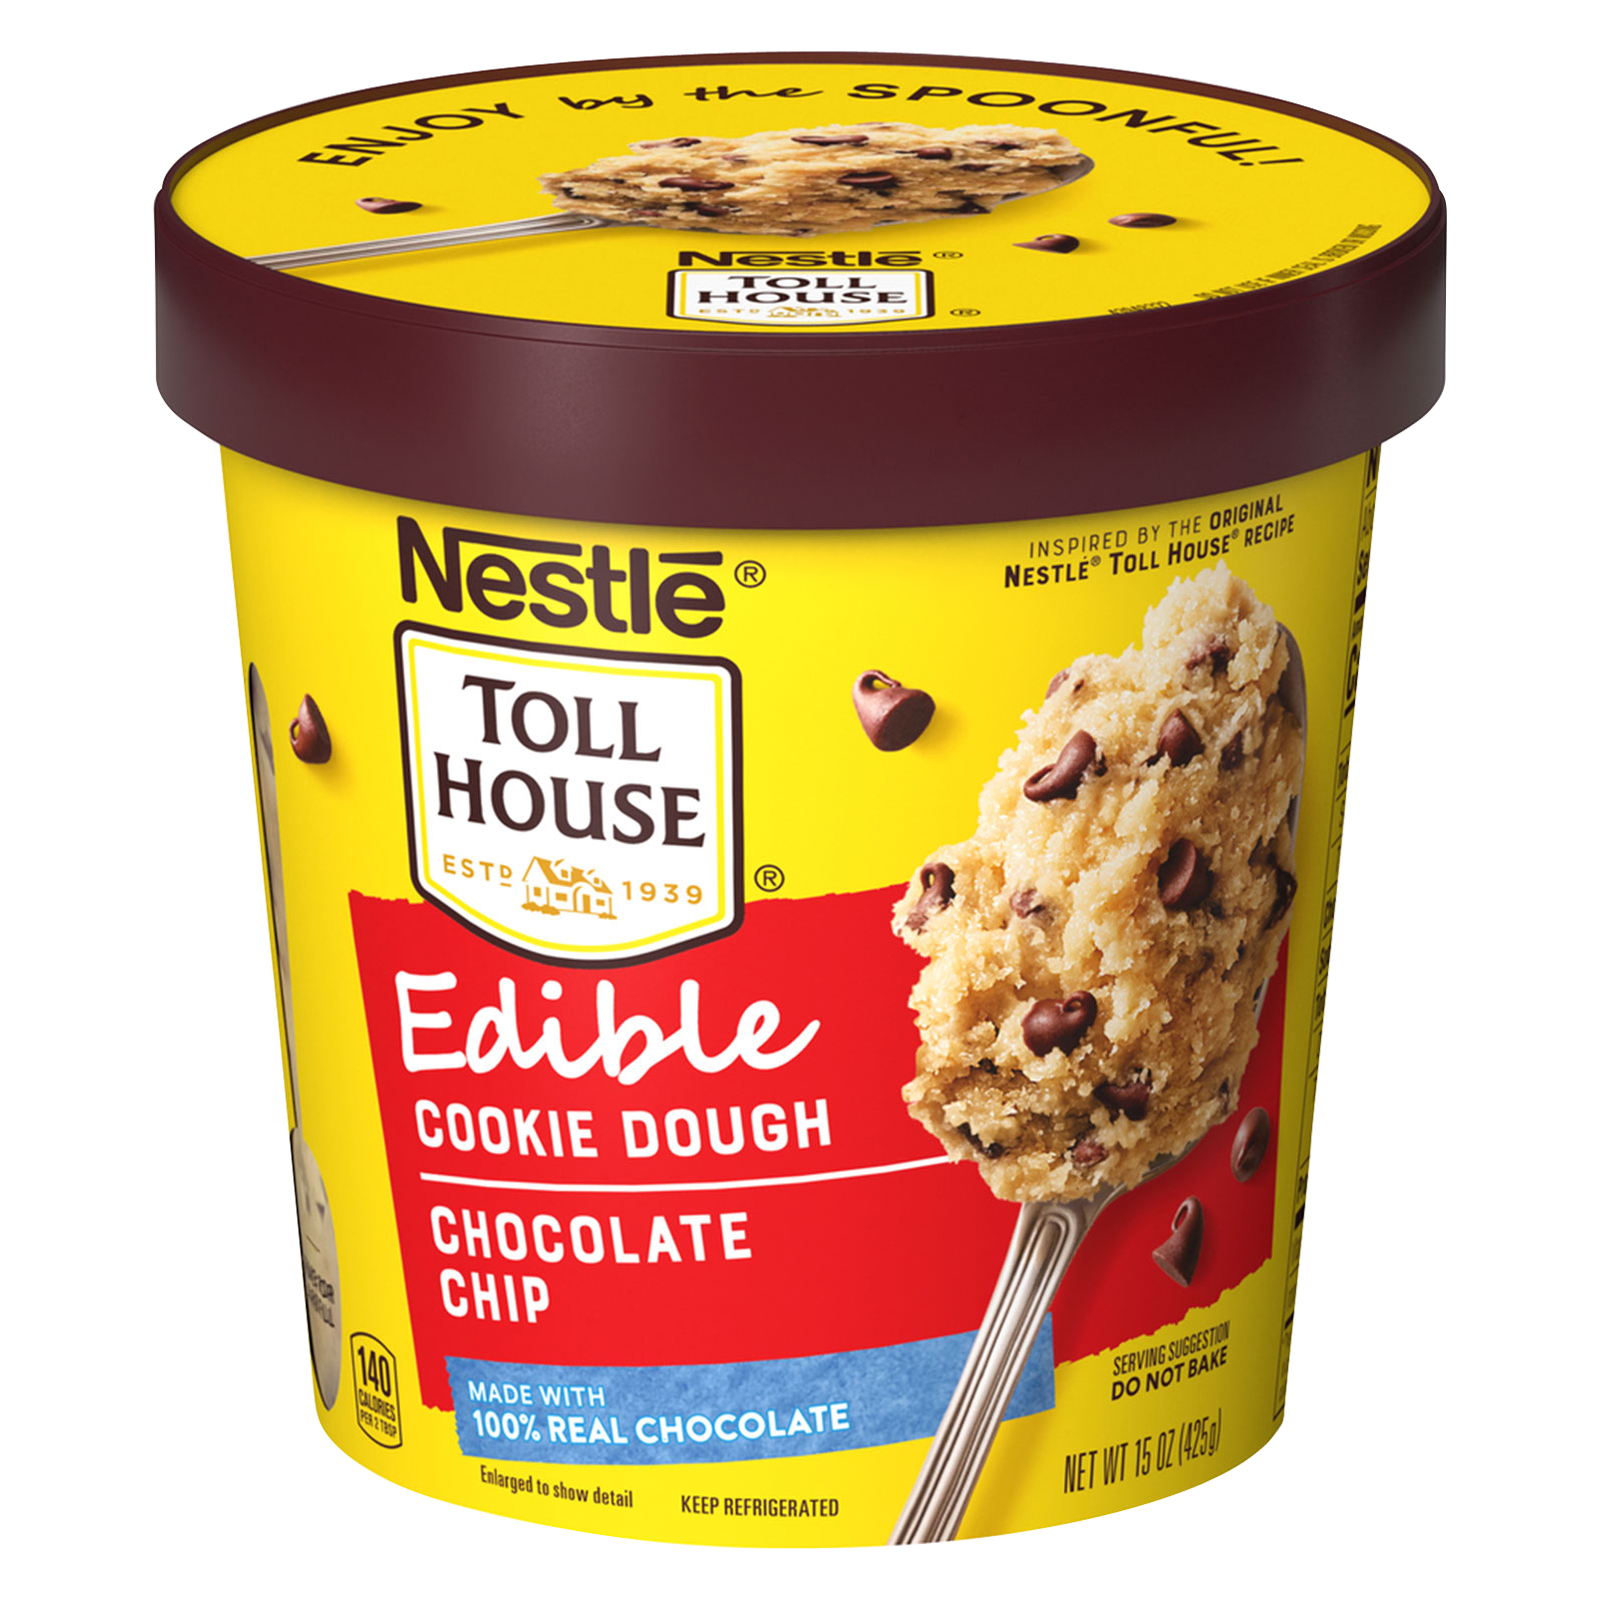 Nestle Toll House Chocolate Chip Edible Cookie Dough - 15oz